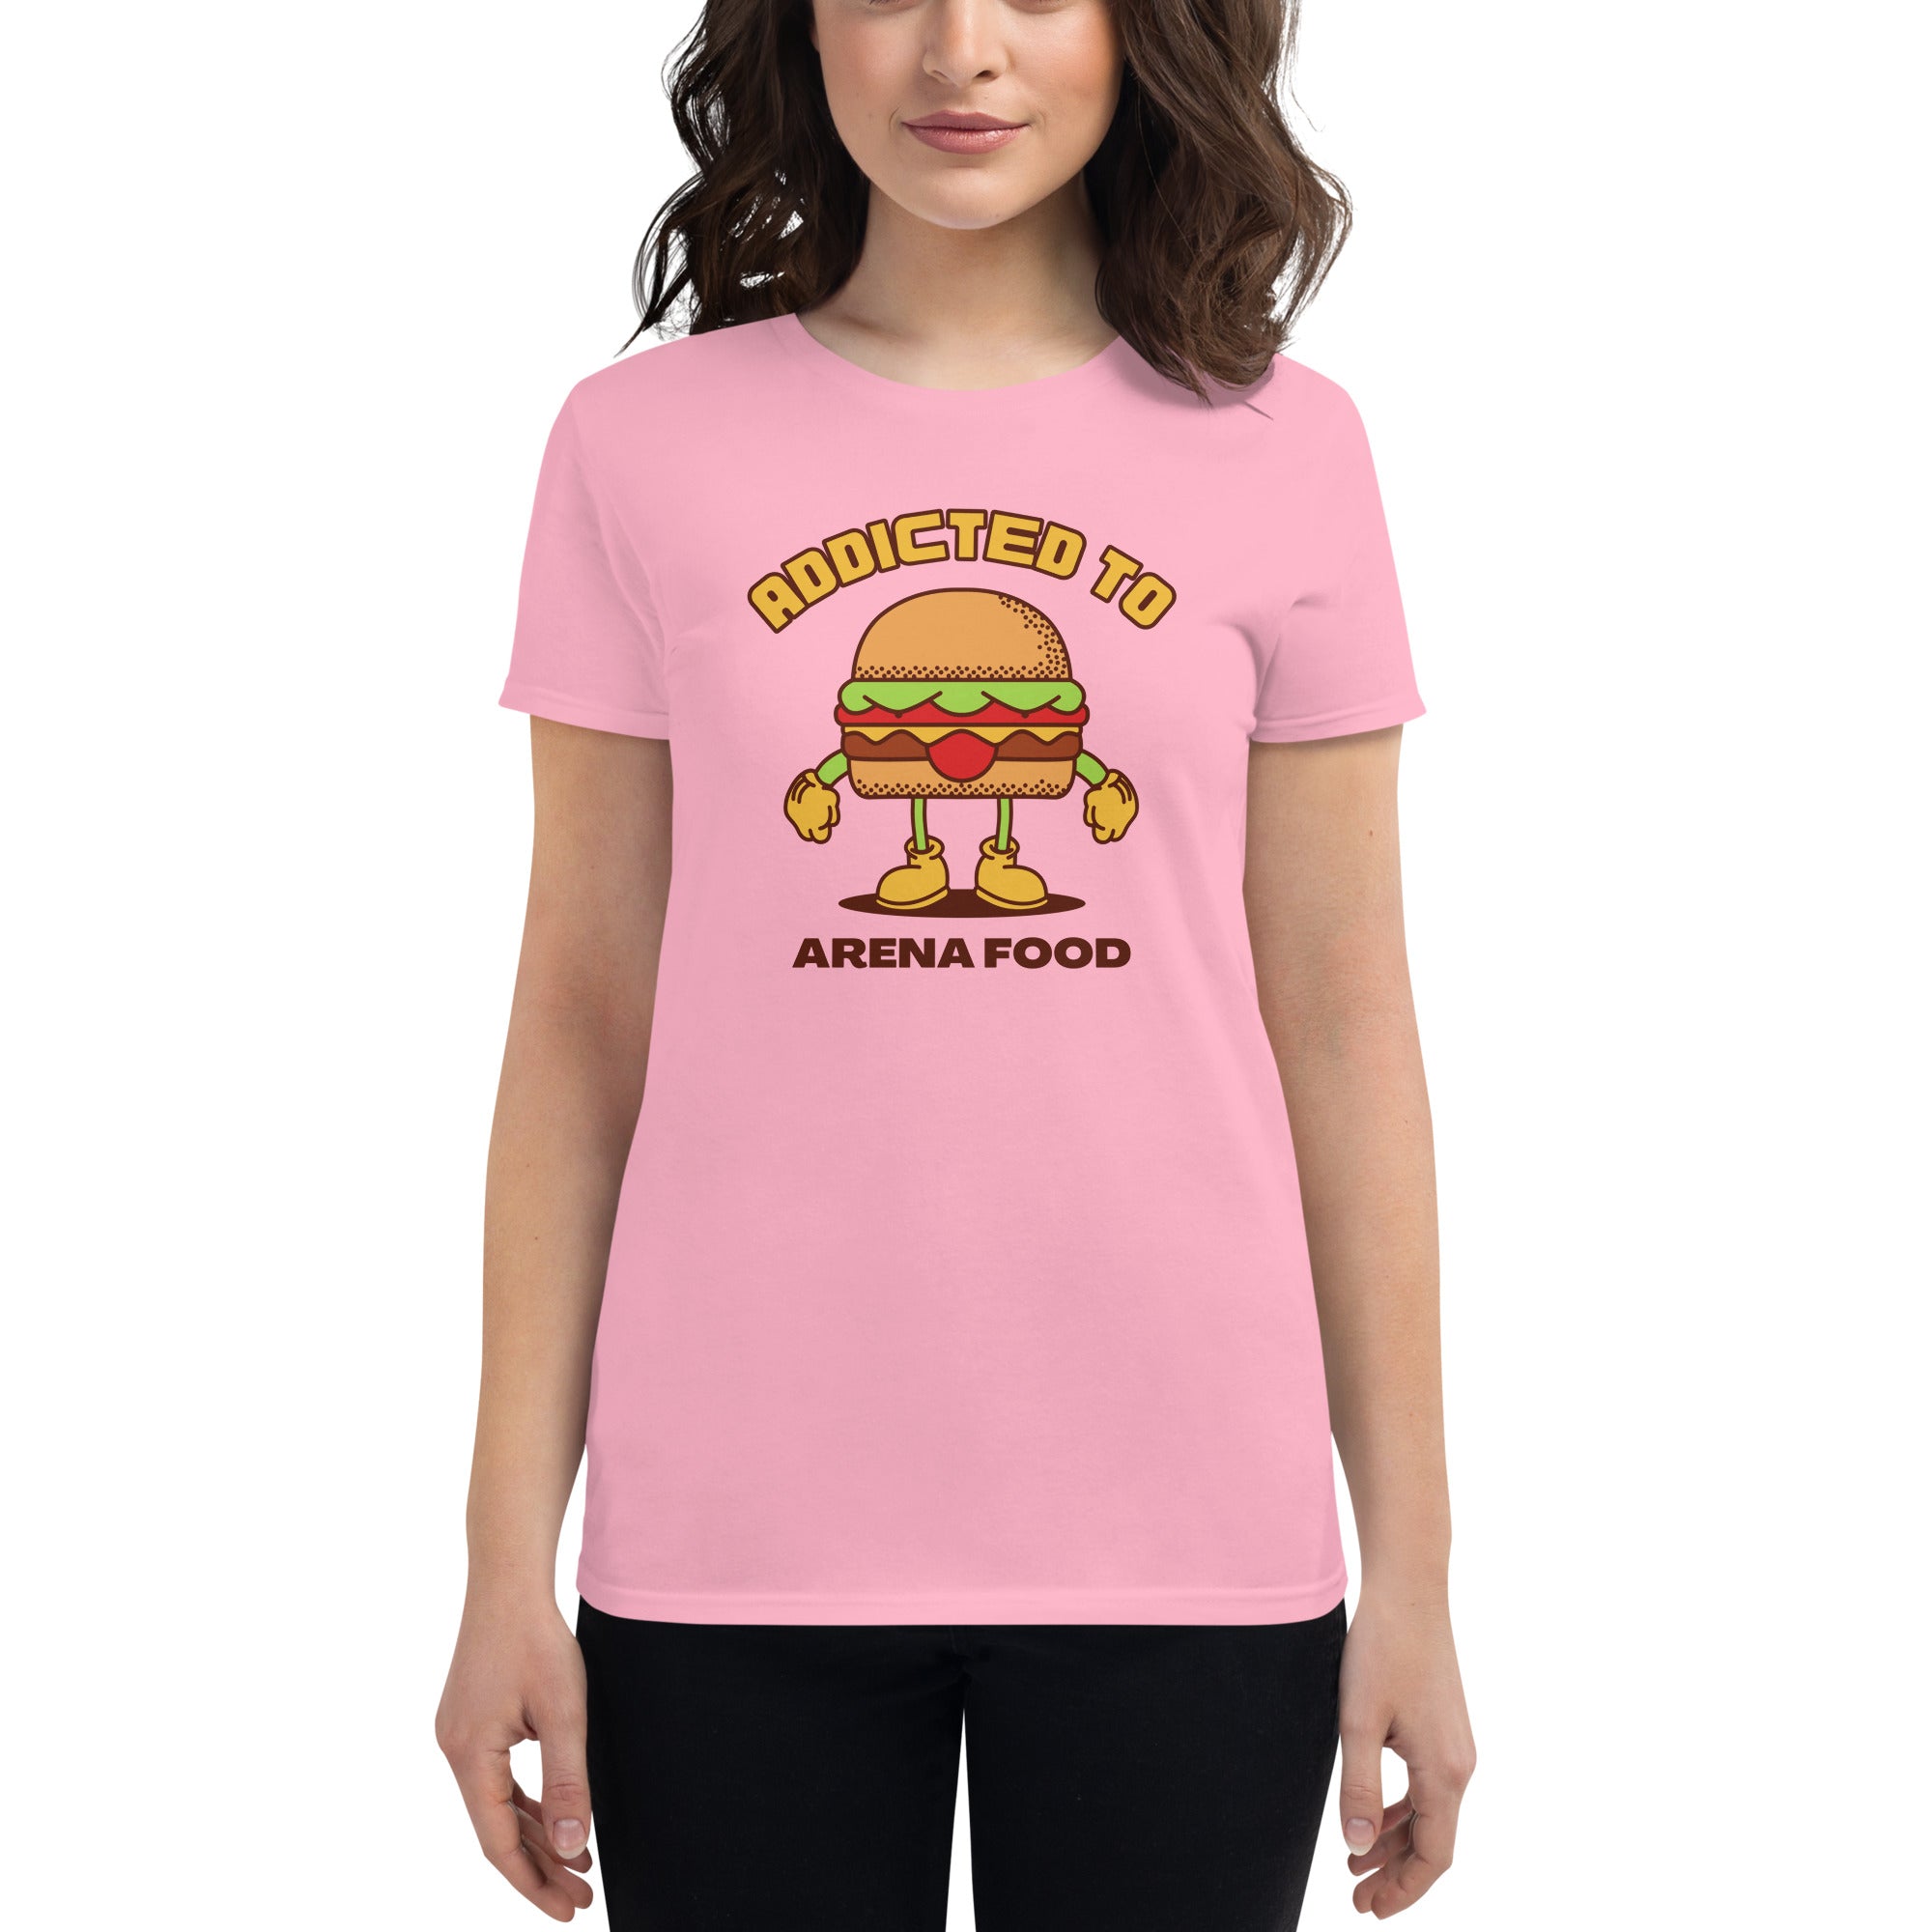 Addicted To Arena Food Women's Classic T-Shirt